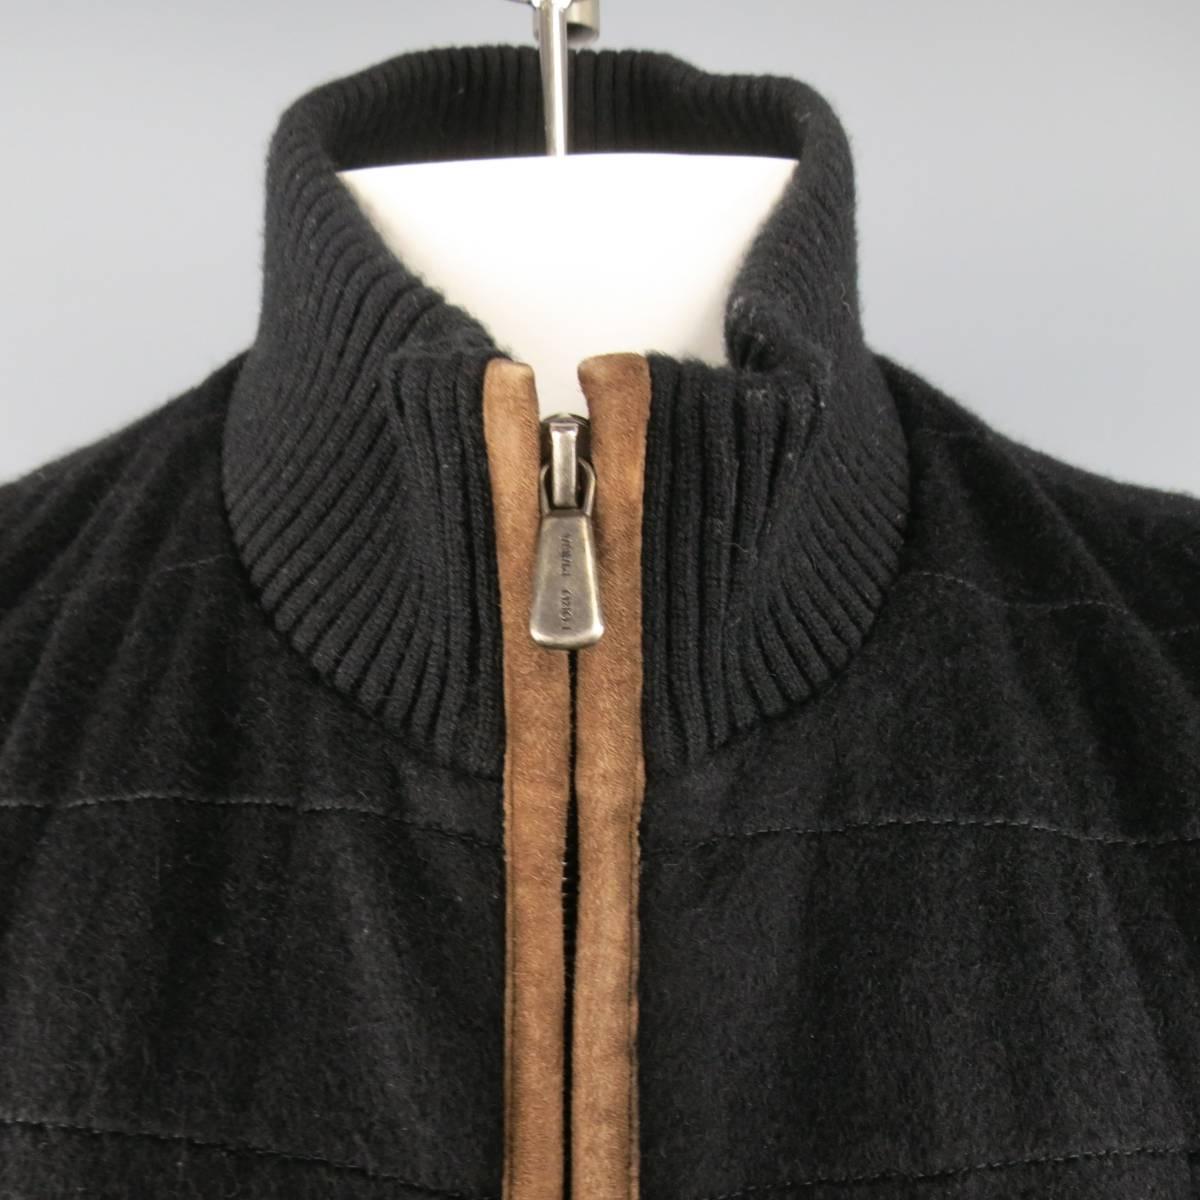 LORO PIANA fall/winter vest comes in a black cashmere and features a high ribbed collar, double zip closure, slit pockets, and tan suede piping. Wear throughout. Made in Italy.
 
Good Pre-Owned Condition.
Marked: XL
 
Measurements:
 
Shoulder: 18.5